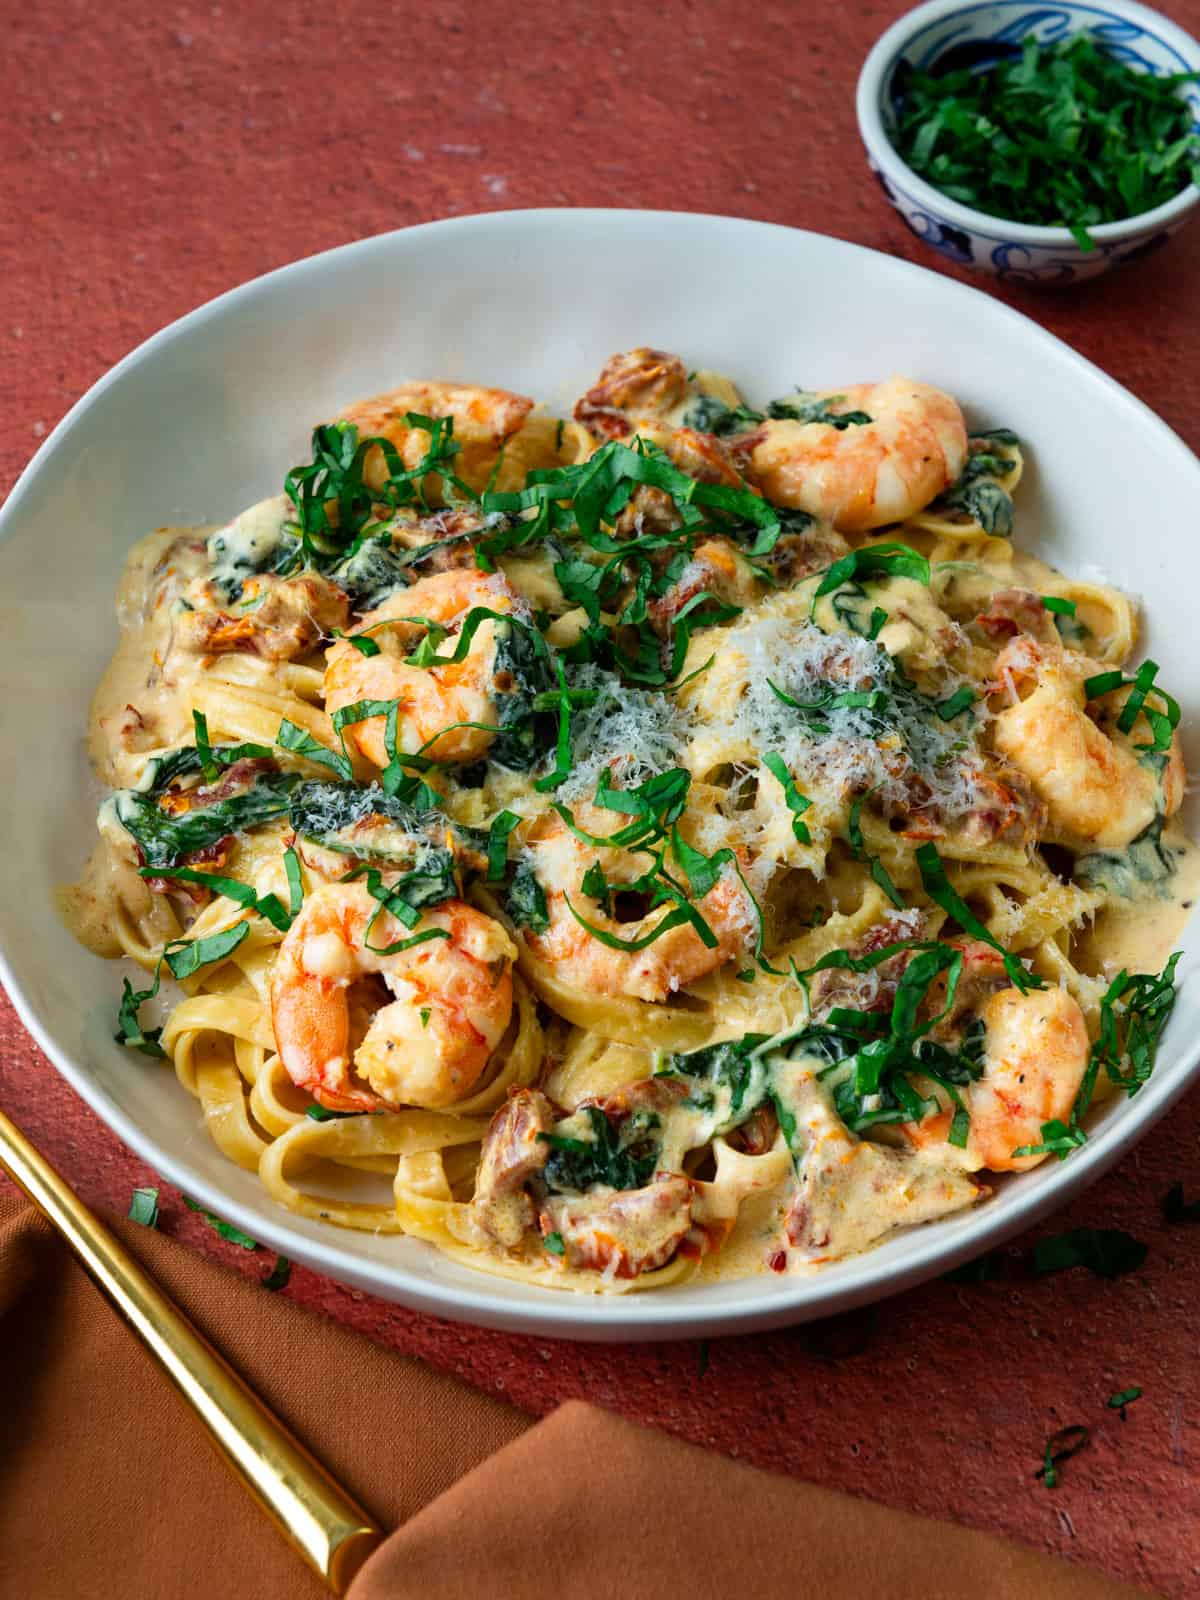 Creamy shrimp pasta with sundried tomatoes, spinach and Parmesan.